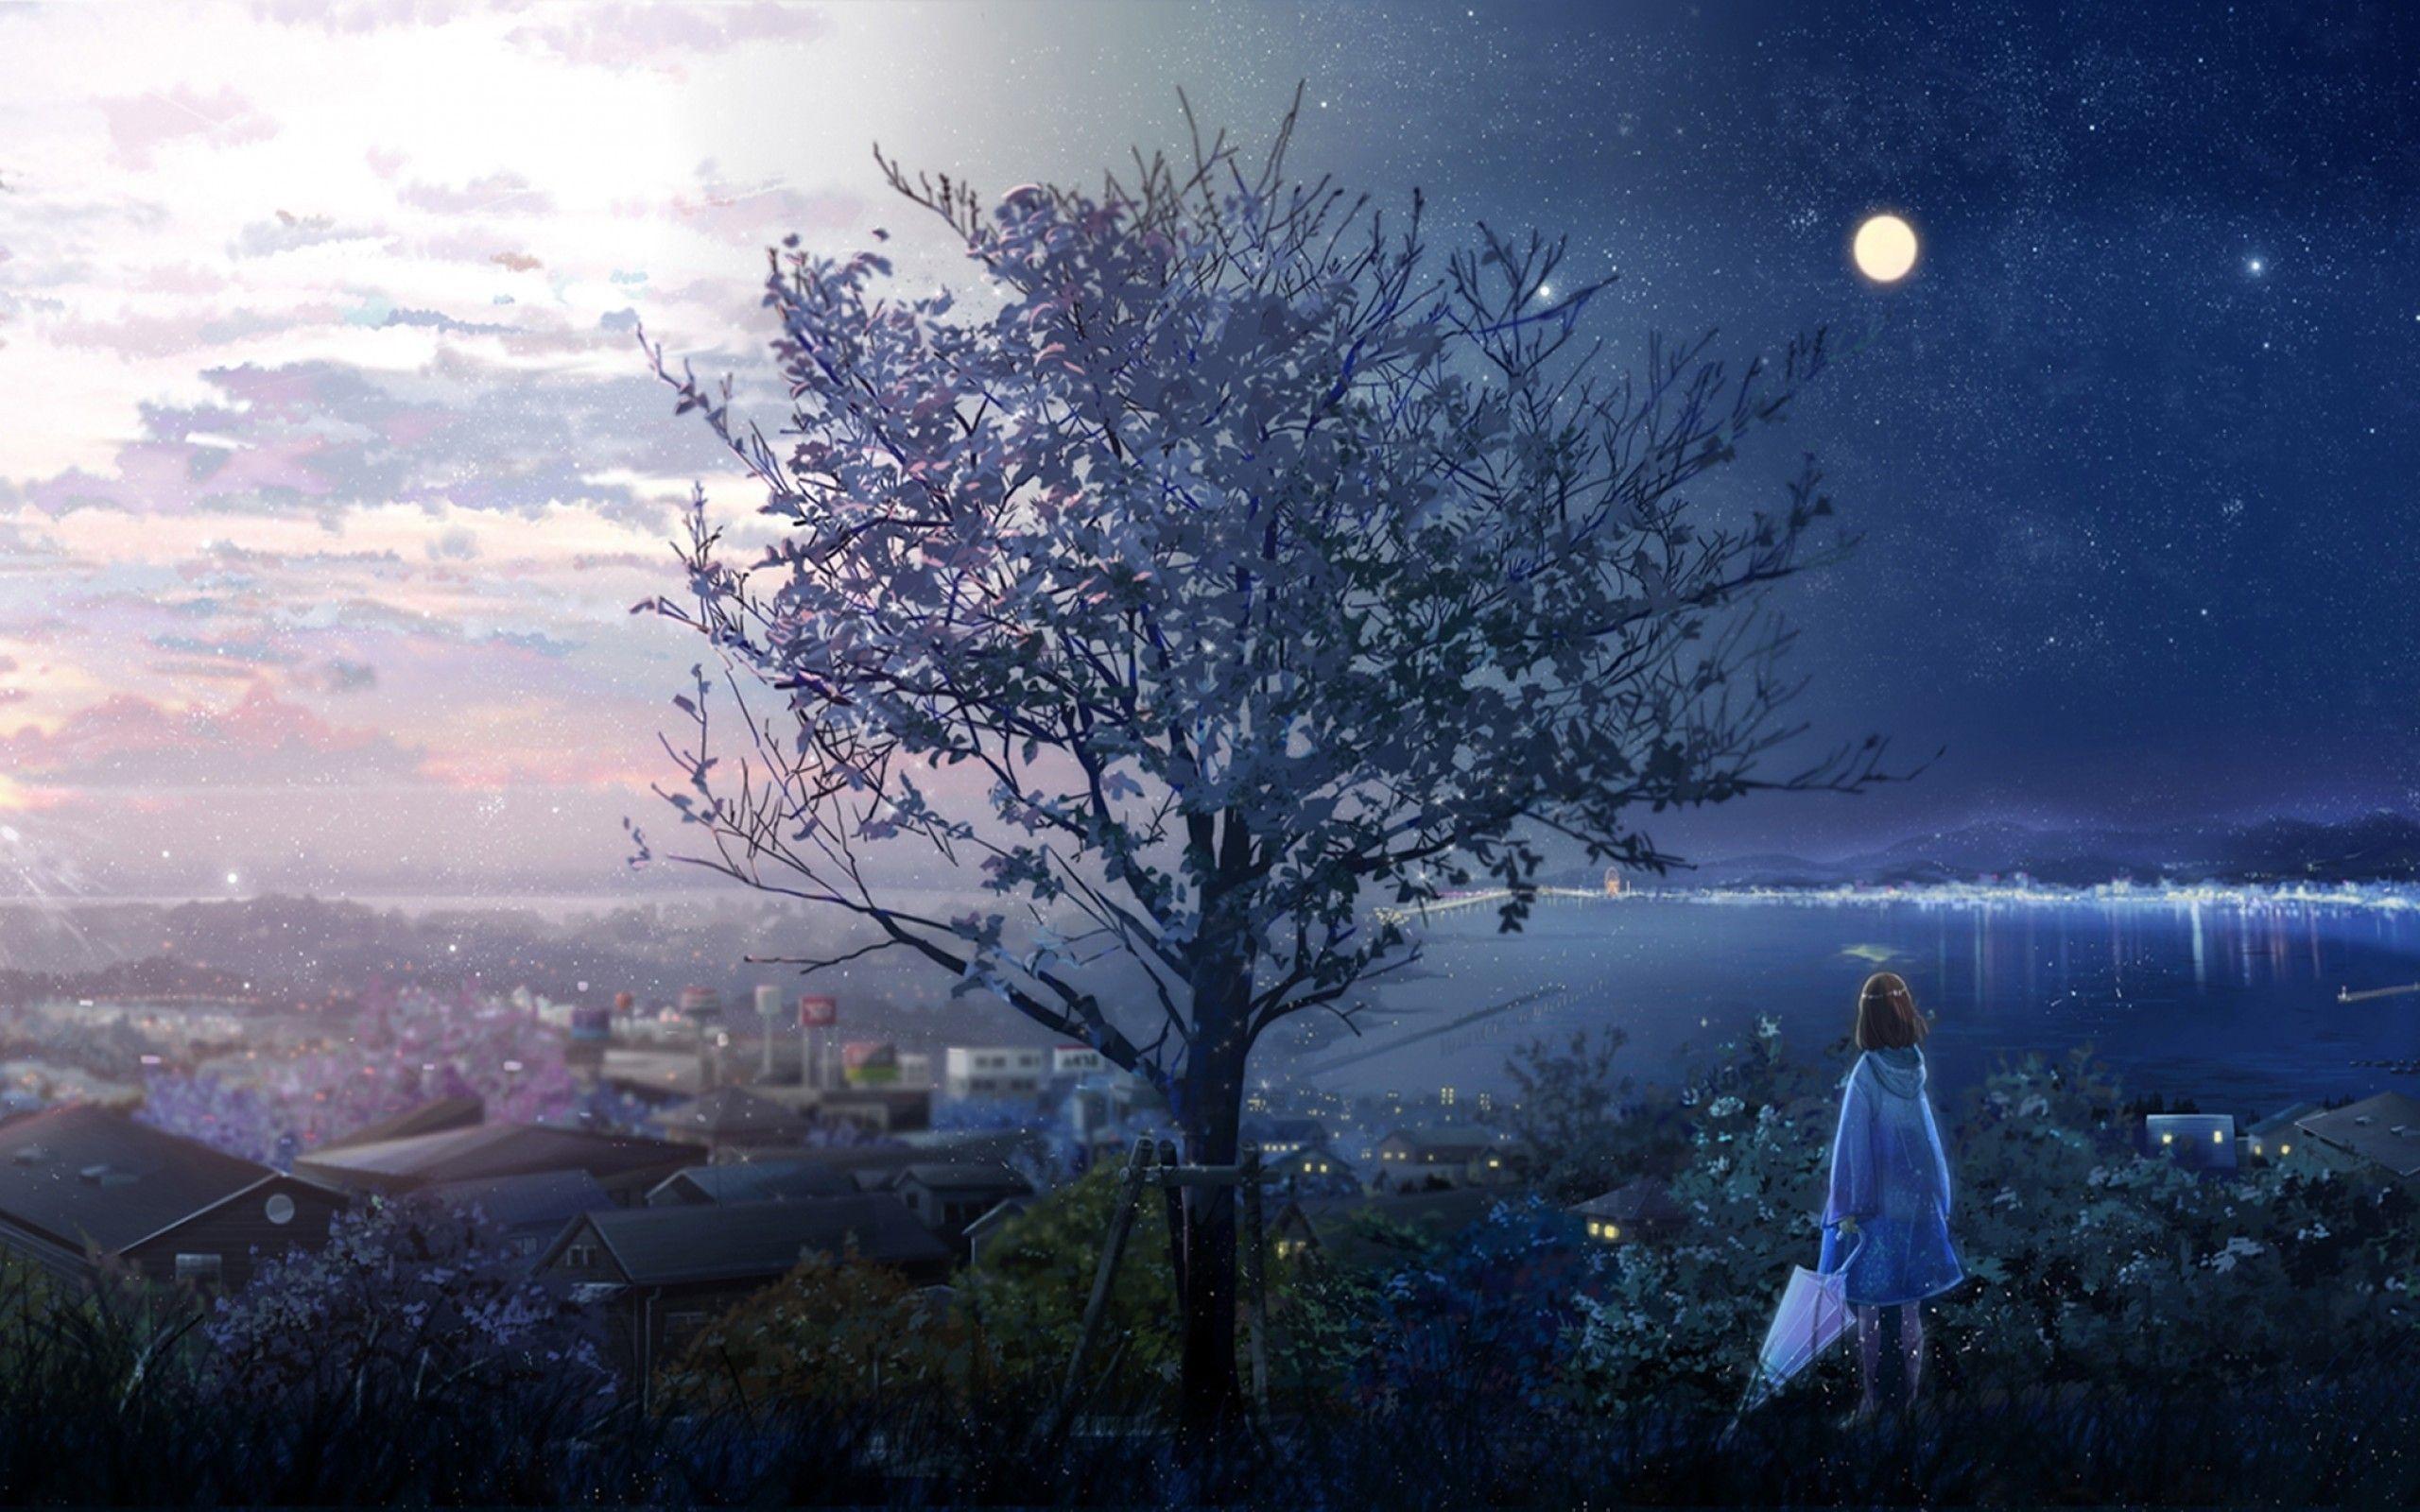 Fantasy Moonlight H5 Background Material Wallpaper Image For Free Download   Pngtree